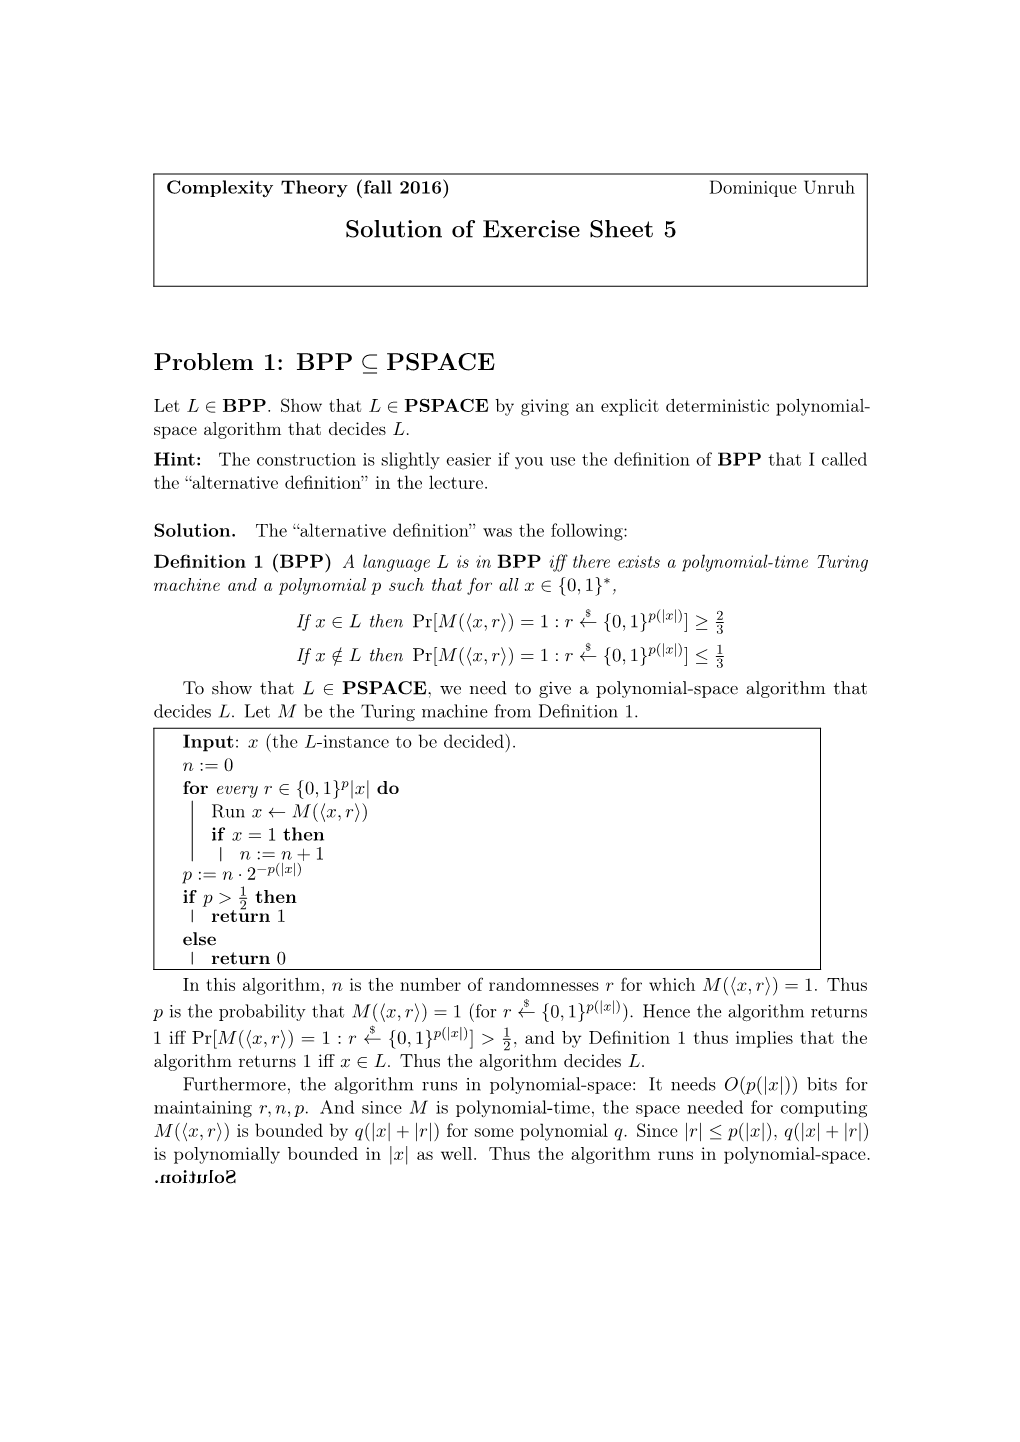 Solution of Exercise Sheet 5 Problem 1: BPP ⊆ PSPACE